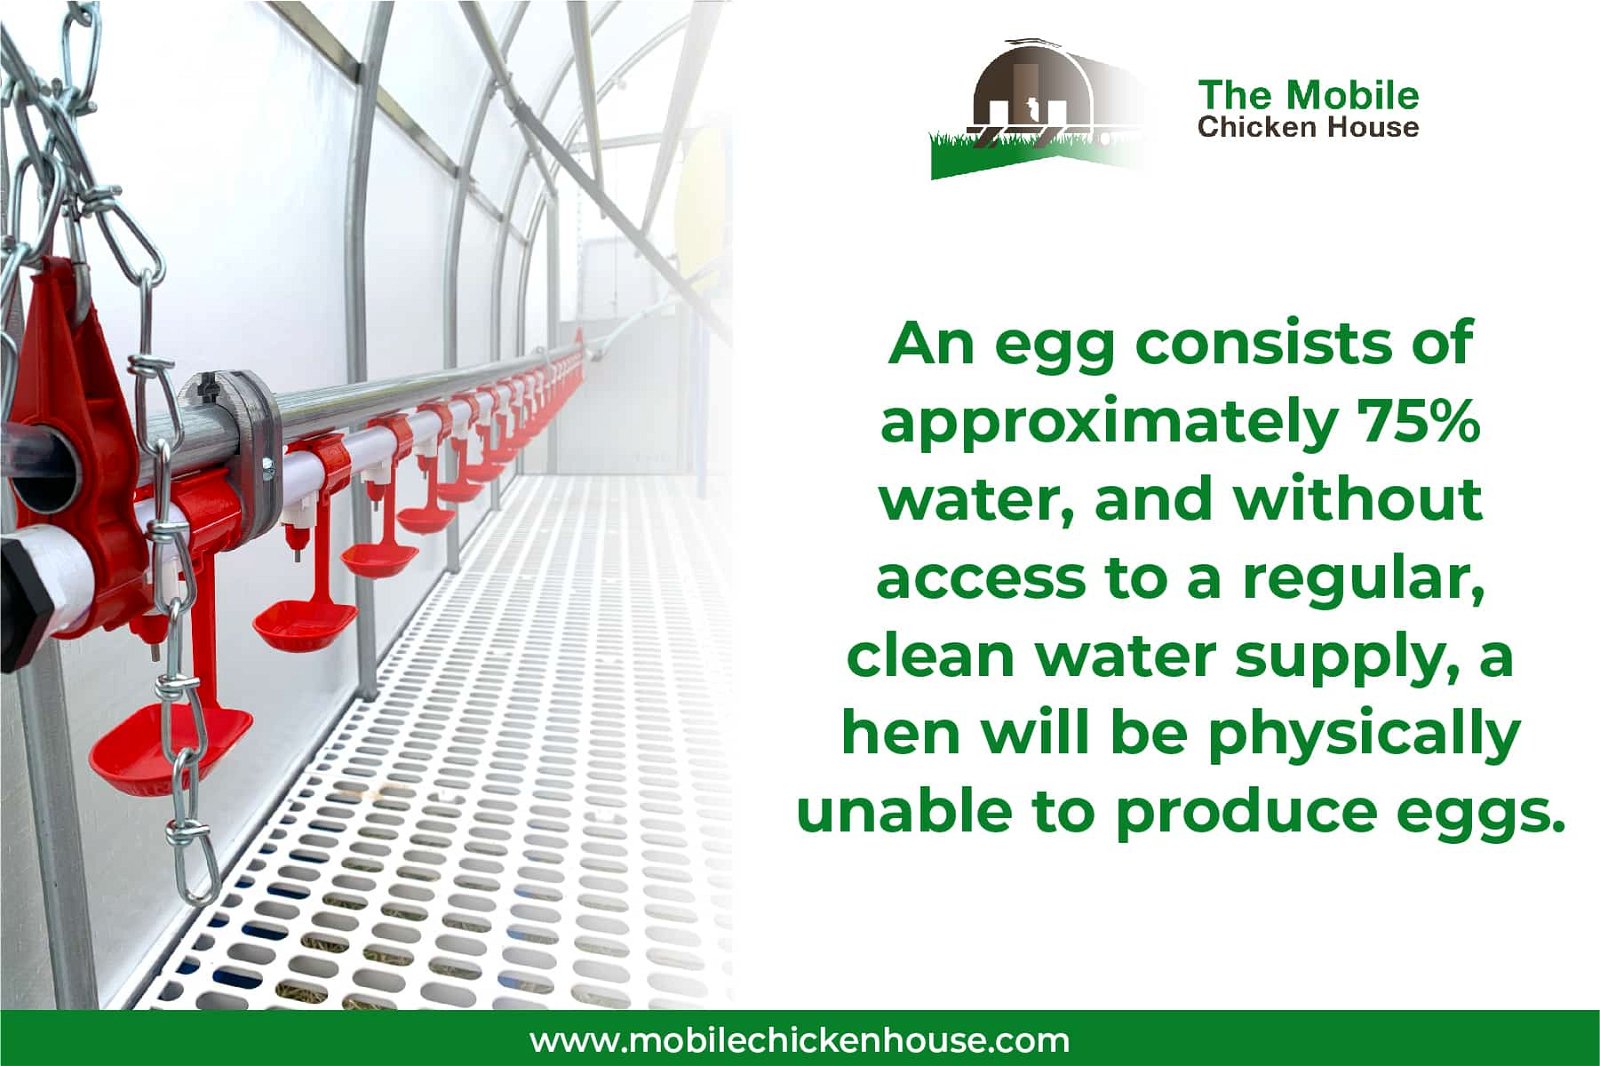 eggs consist of approximately 75% water